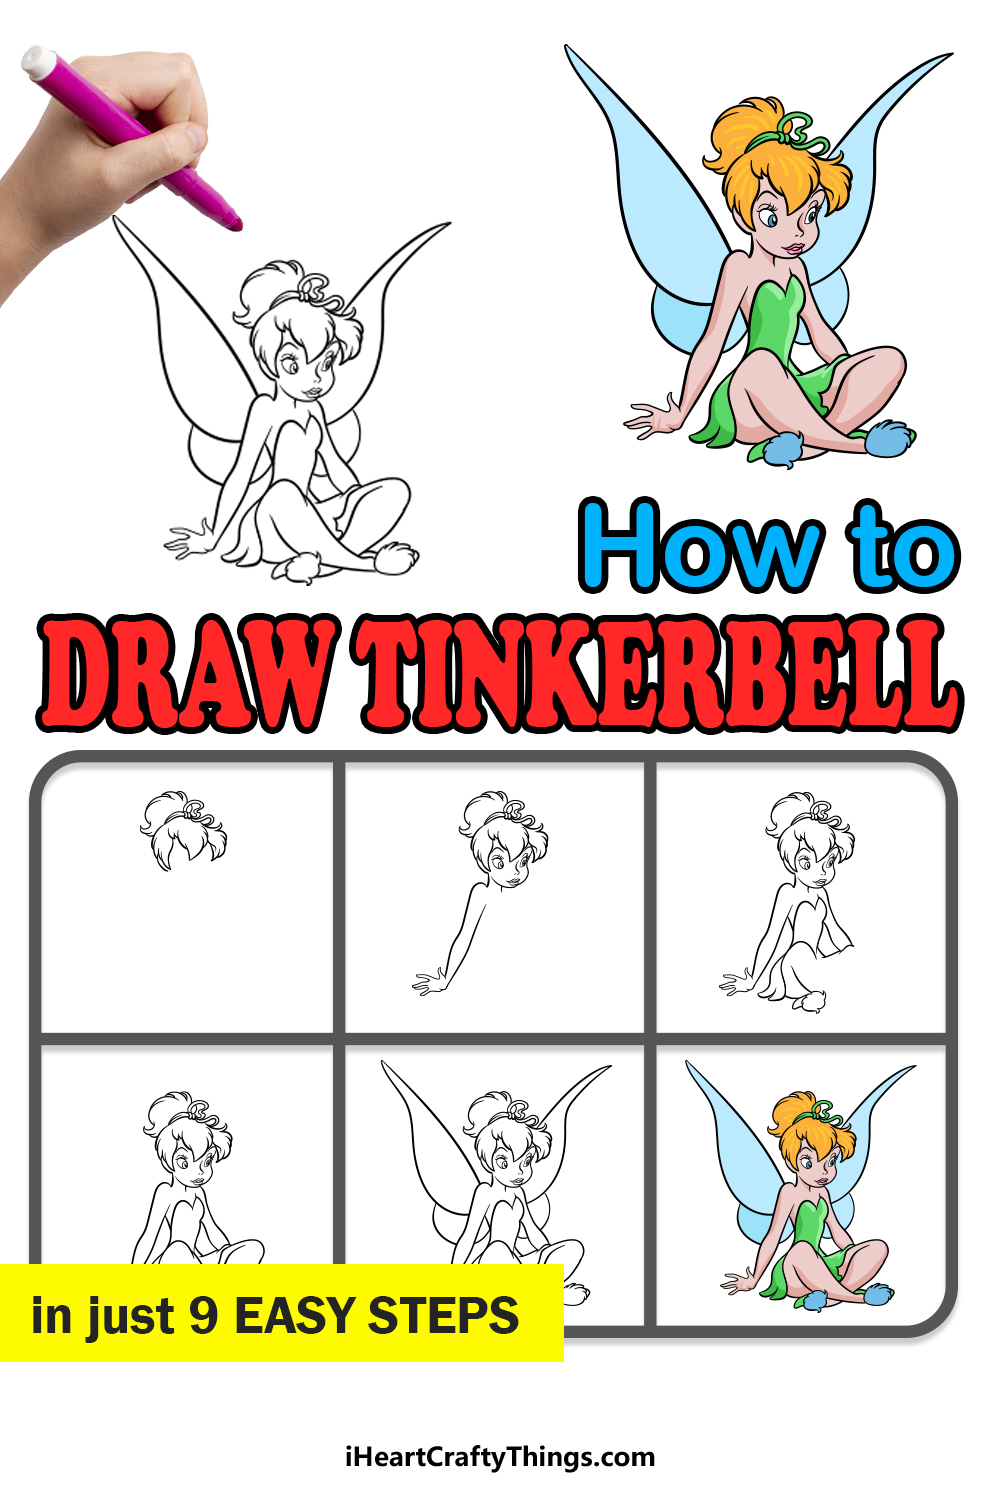 how to draw Tinkerbell in 9 easy steps